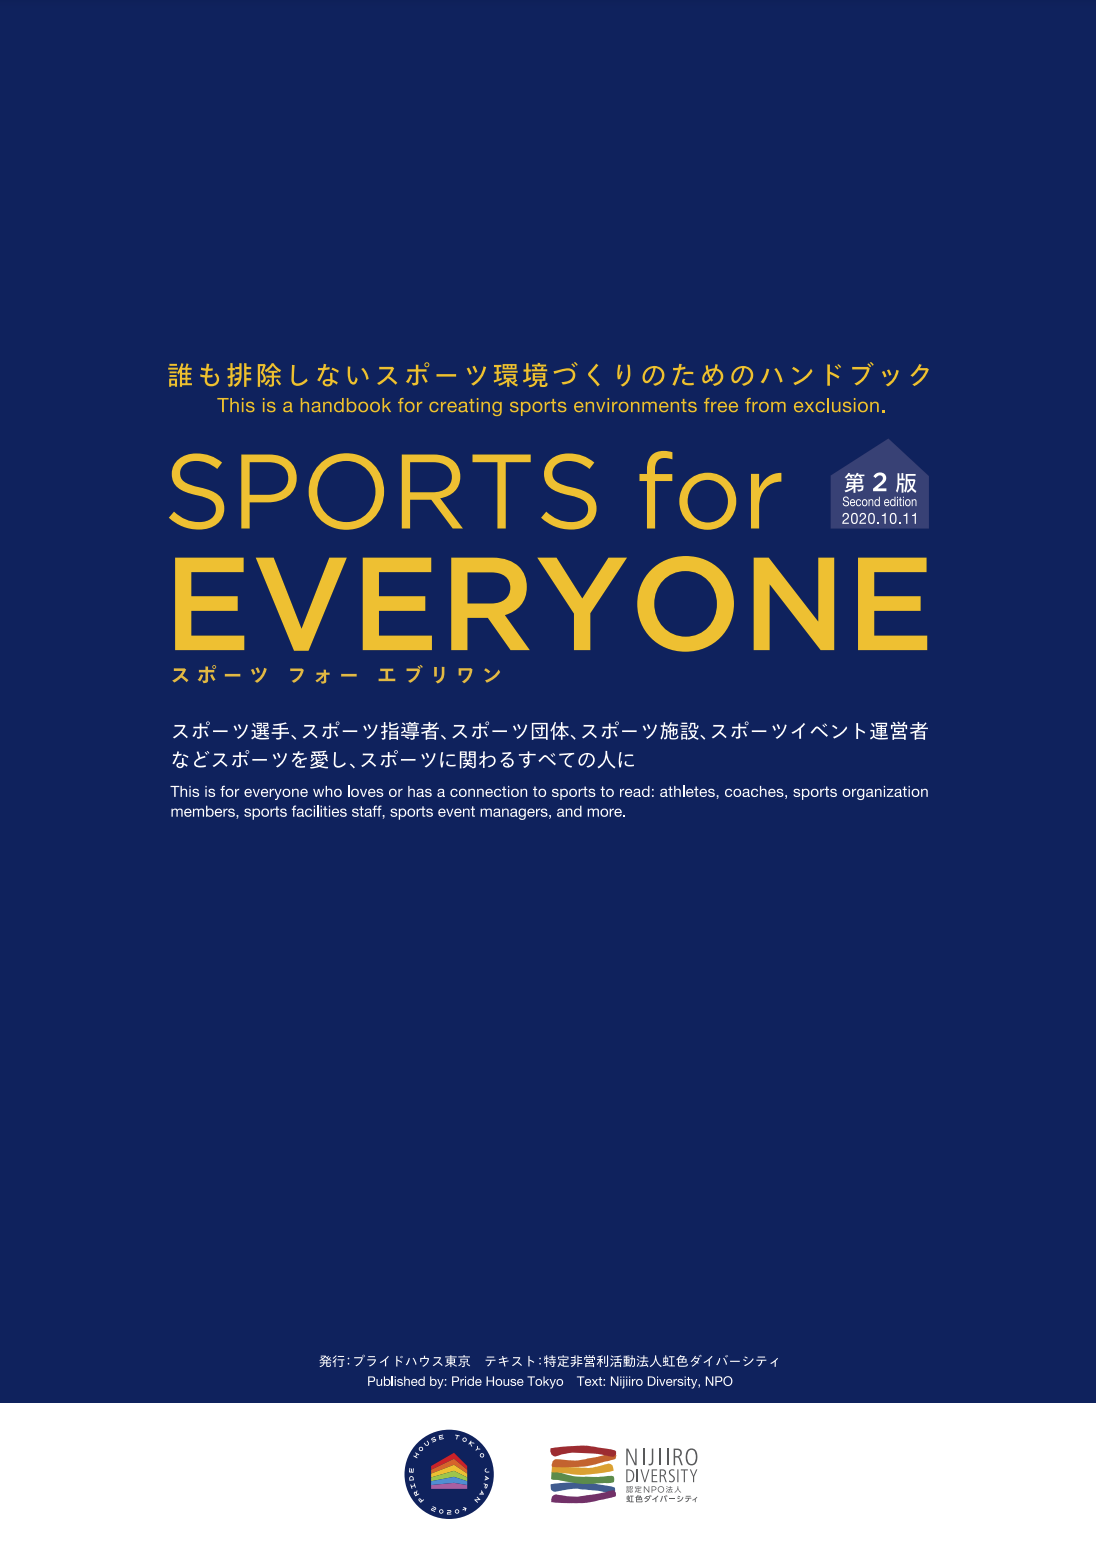 Sports for Everyone